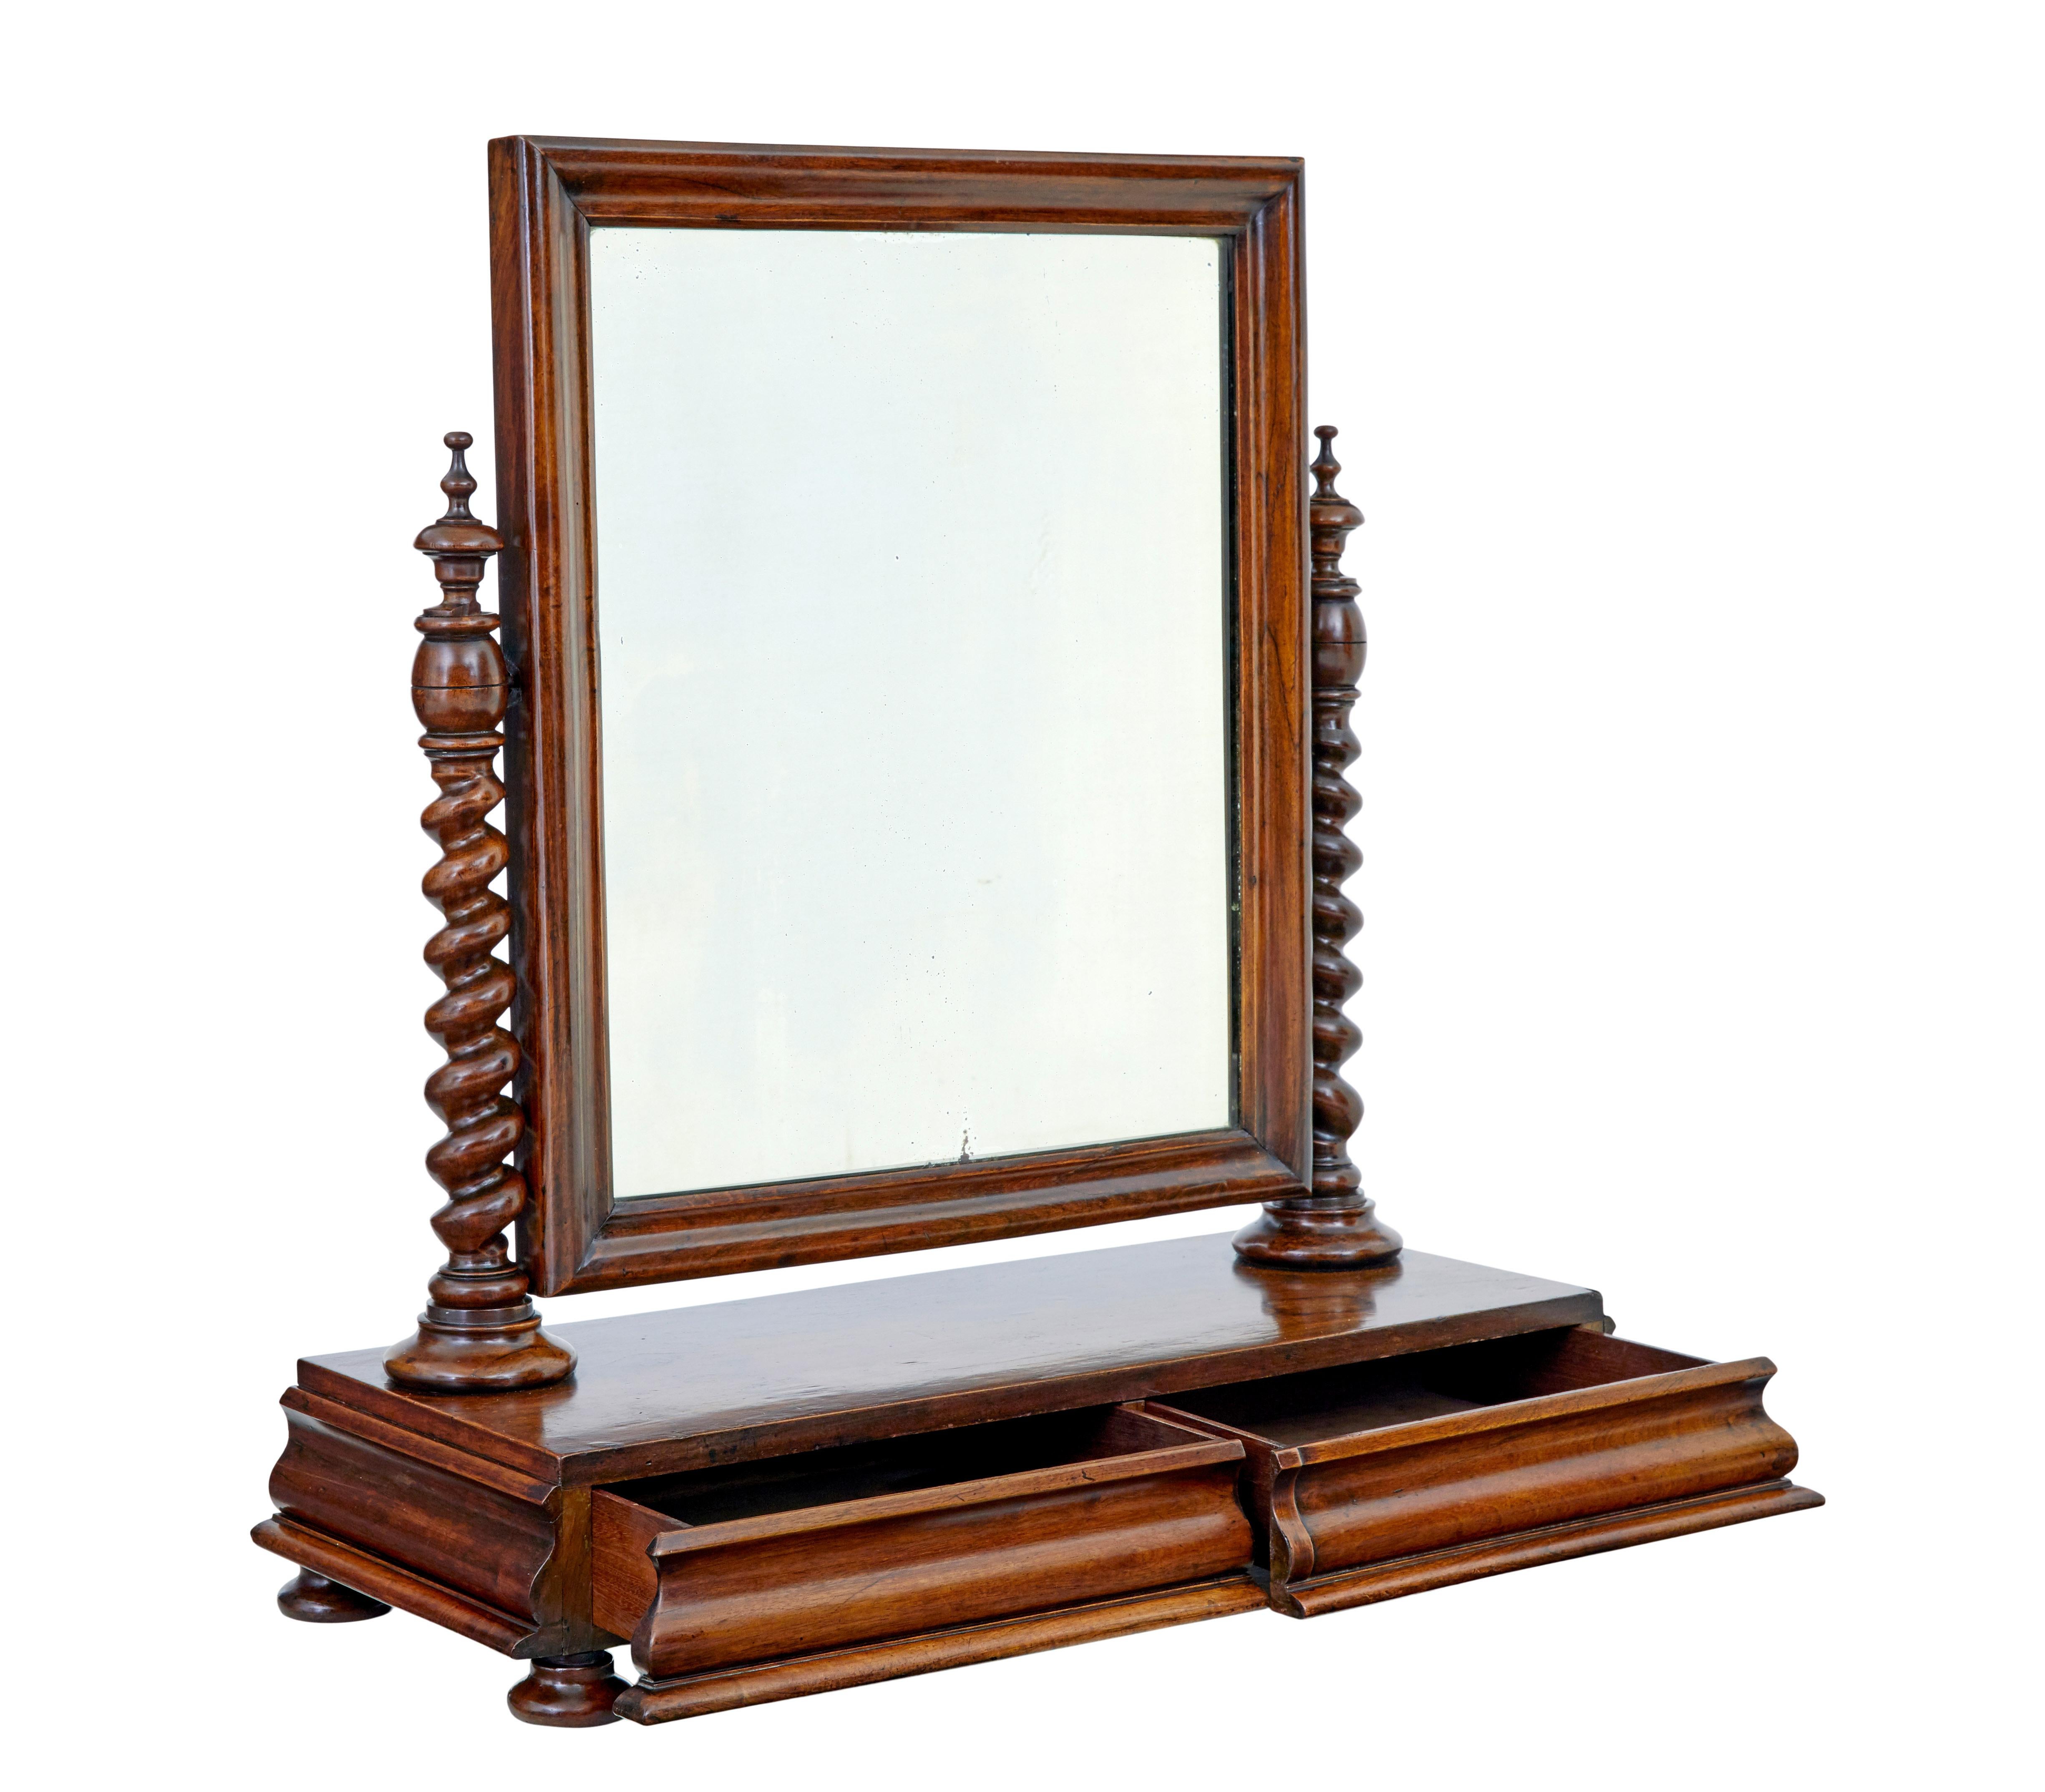 Mid 19th century carved walnut toilet mirror circa 1860.

Very good quality and of quite grand proportions for this type of mirror.

Original mirror plate encased in a moulded walnut frame, swivel action which holds position well.  Suspended by a